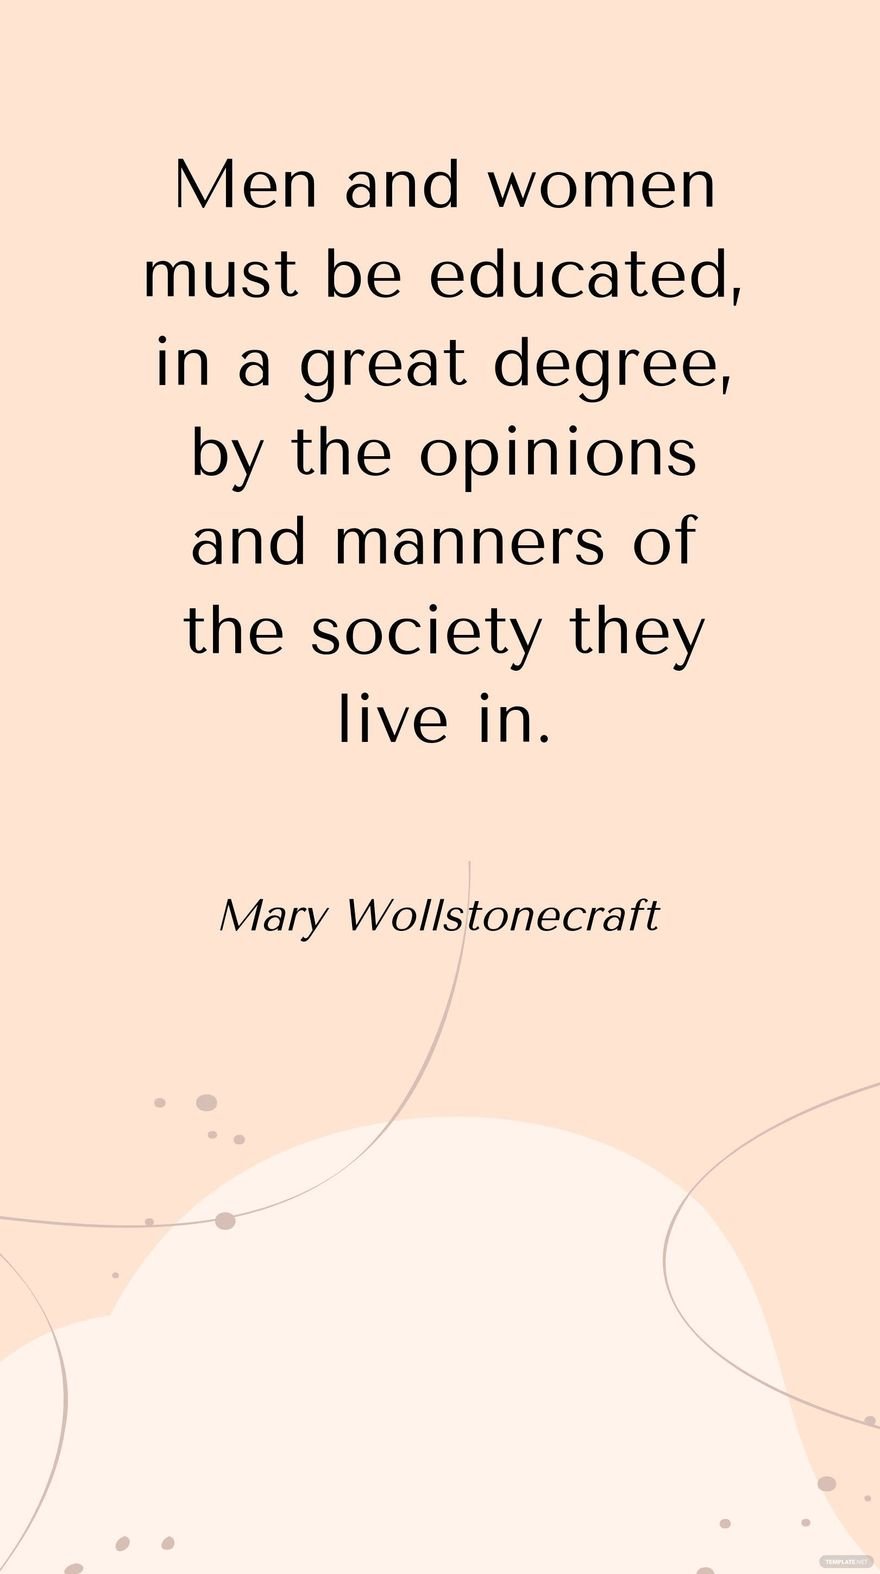 Mary Wollstonecraft - Men and women must be educated, in a great degree, by the opinions and manners of the society they live in.